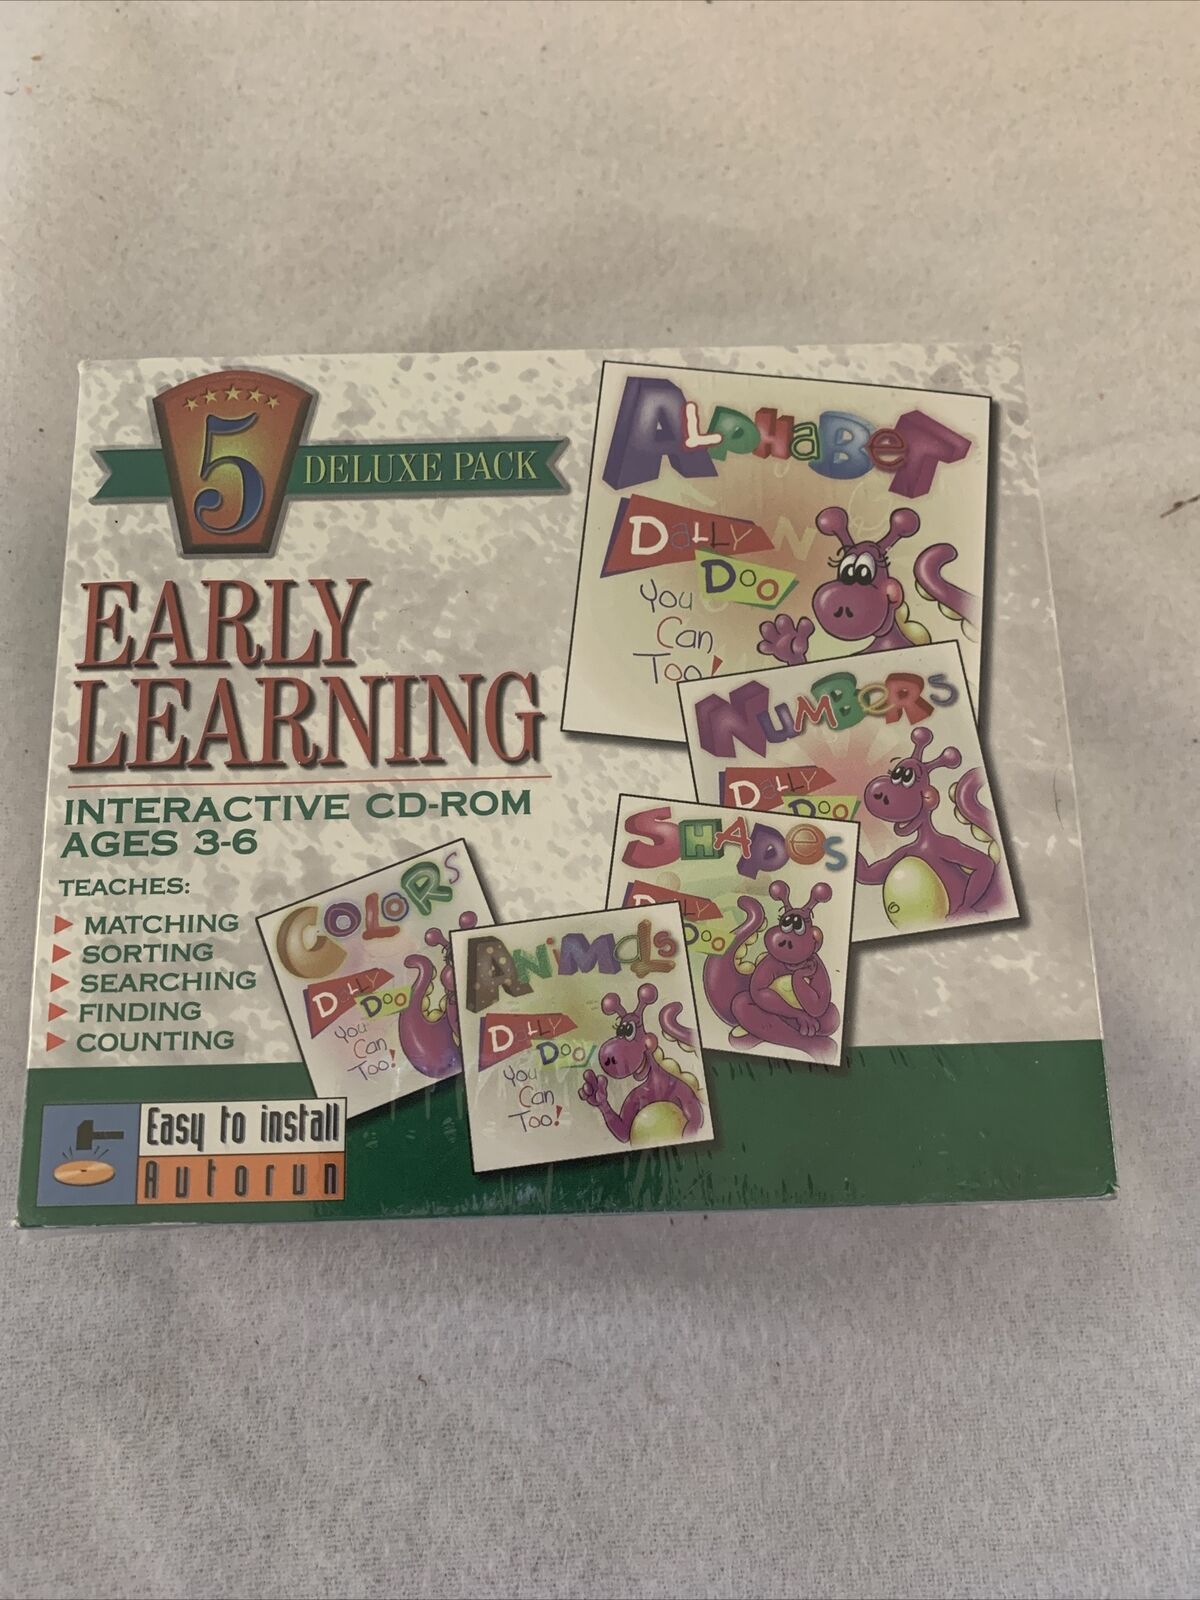 Early Learning Interactive CD-Rom Ages 3-6 5 Deluxe Pack Sealed NOS